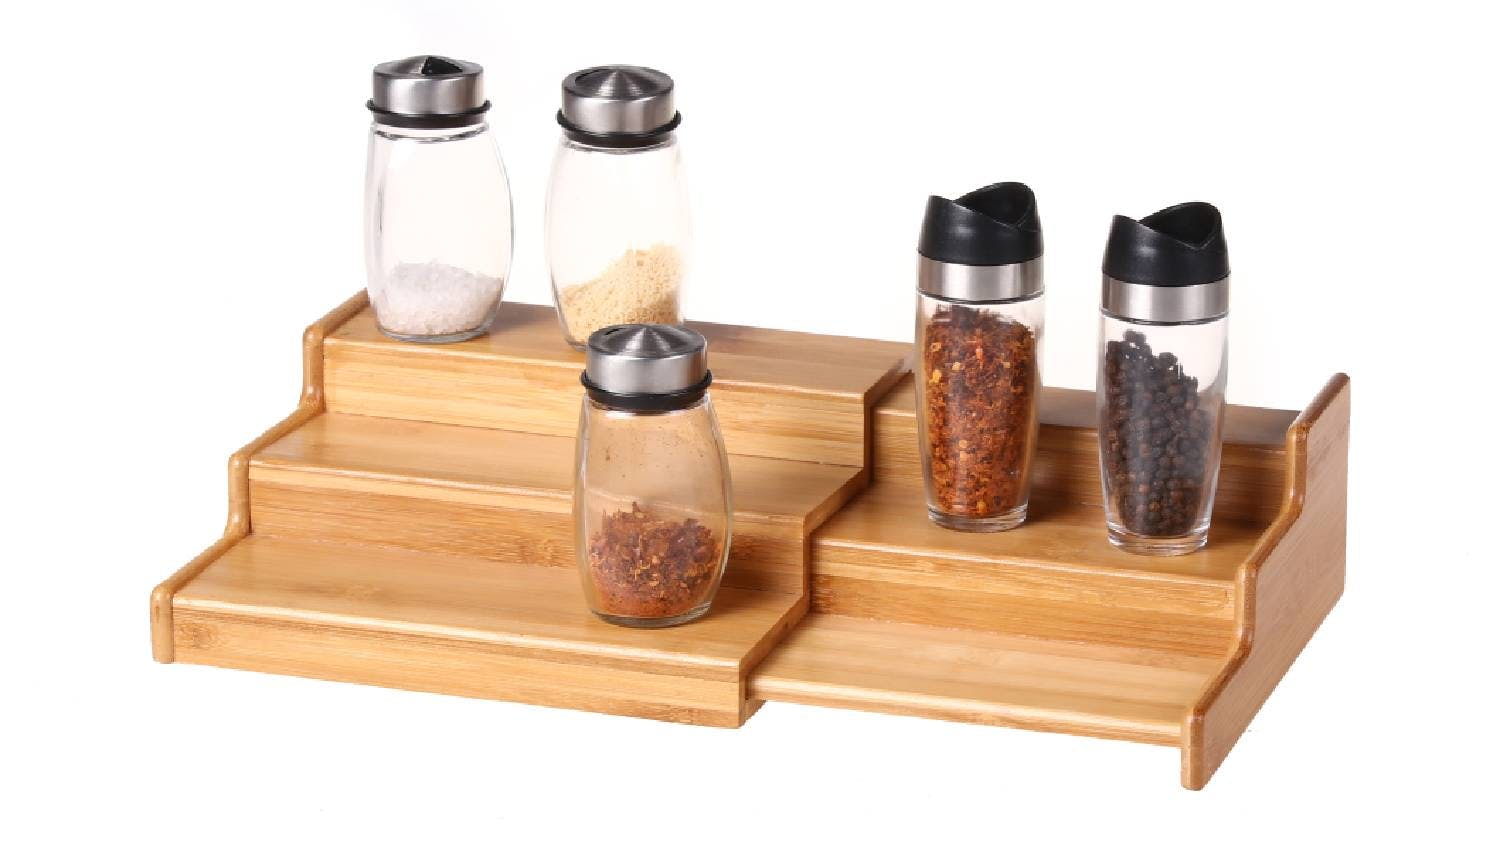 Gourmet Kitchen 3 Tier Expandable Spice Rack - Natural Bamboo